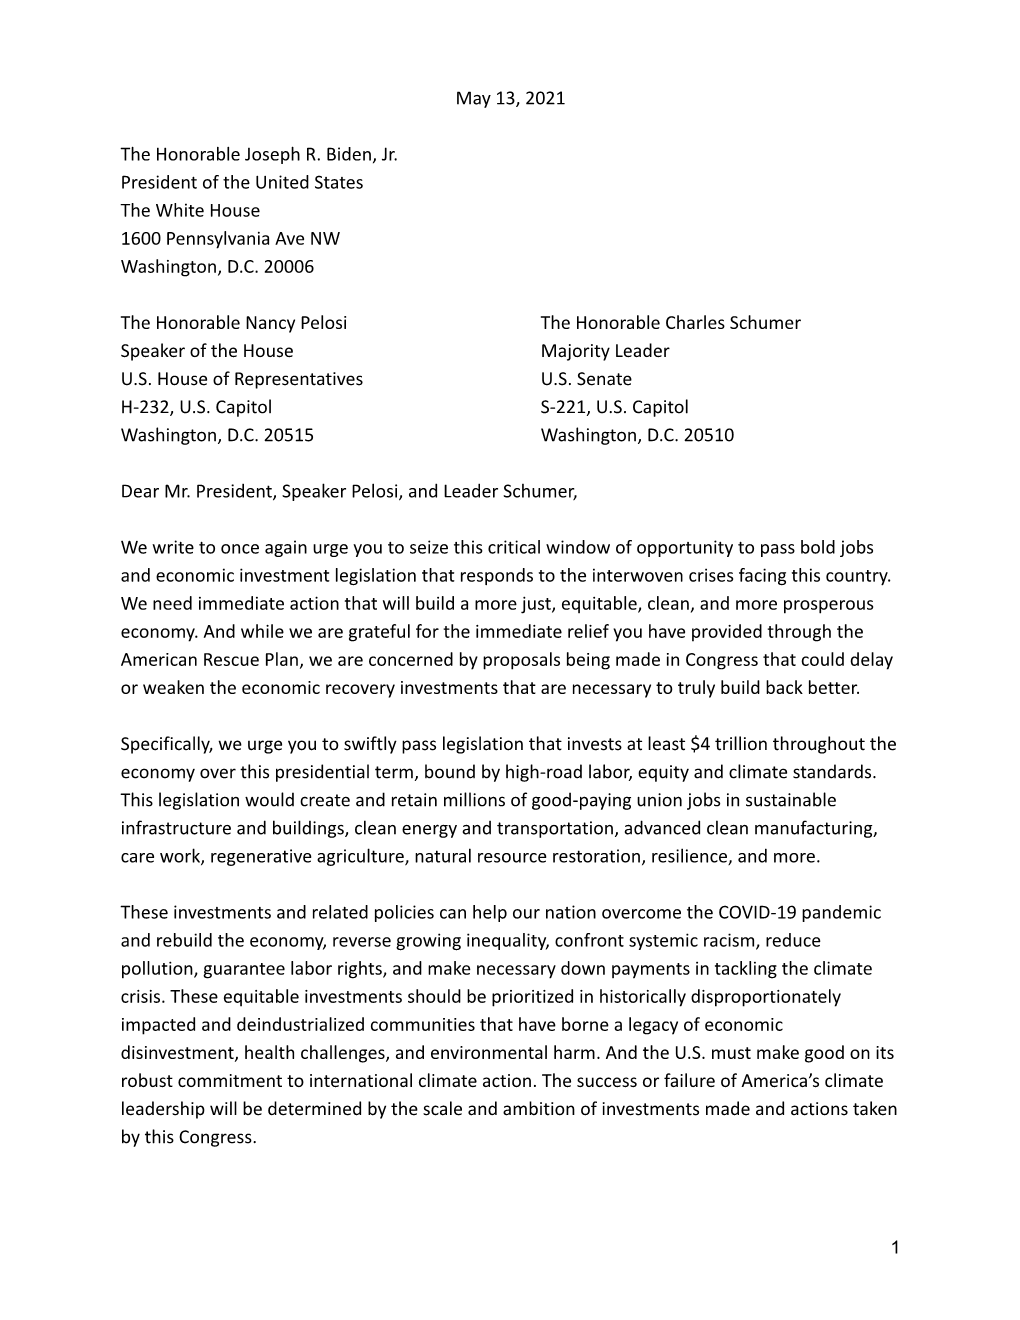 Embargoed Letter to President Biden and Congress 5.13.21